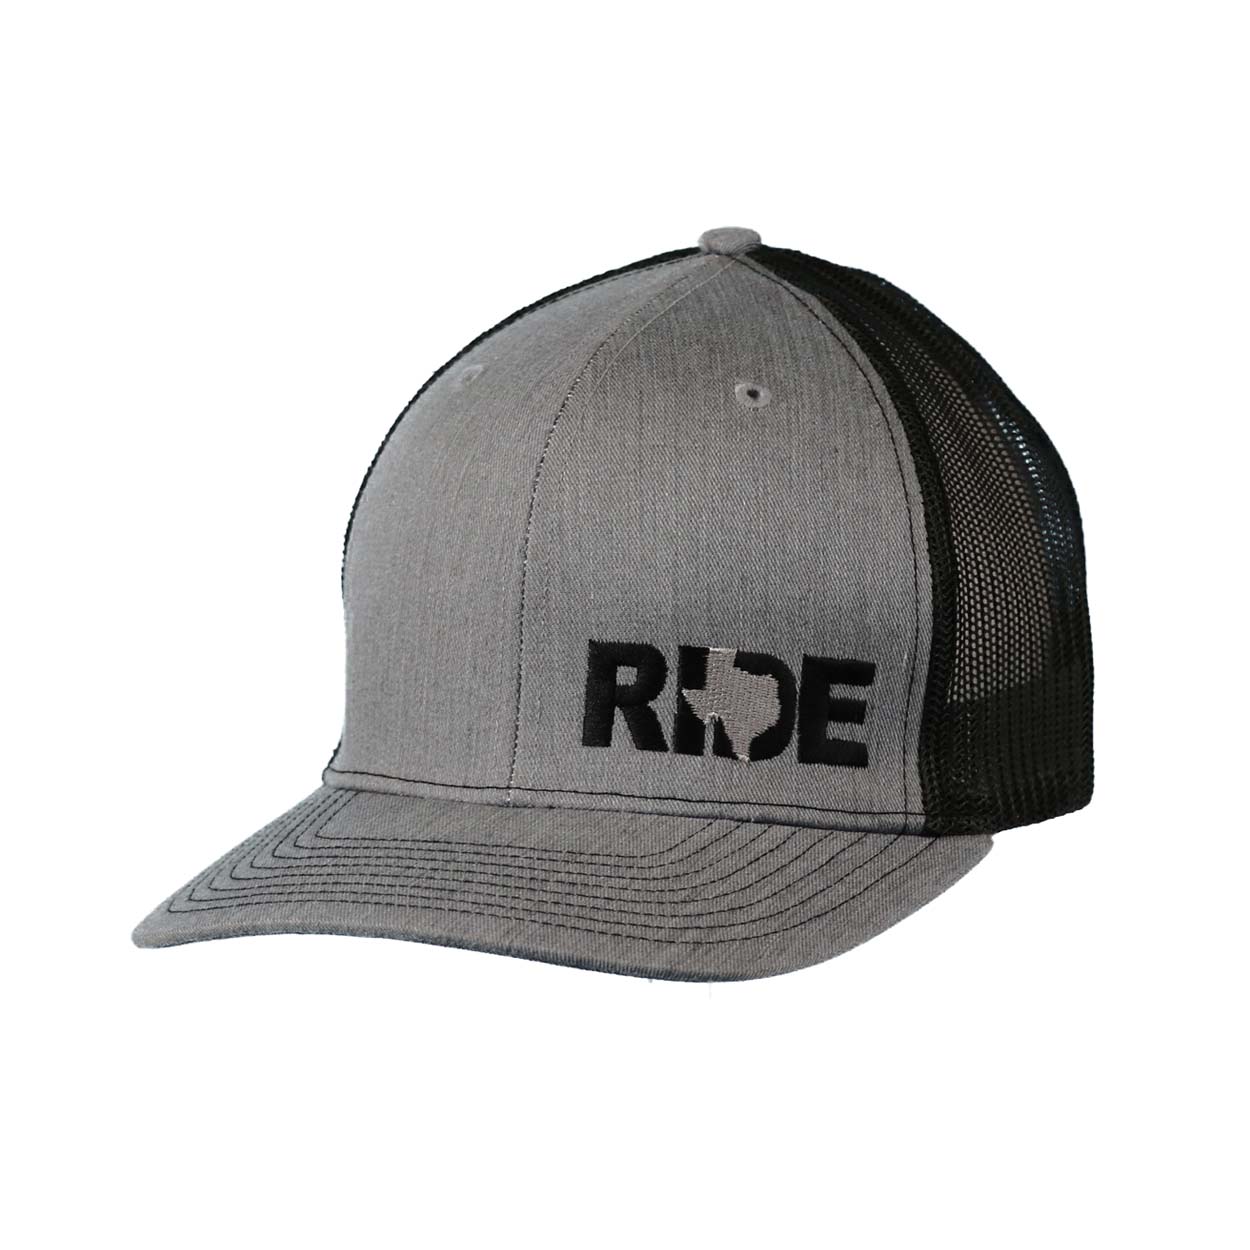 Ride Texas Classic Pro Night Out Embroidered Snapback Trucker Hat Heather Gray/Black